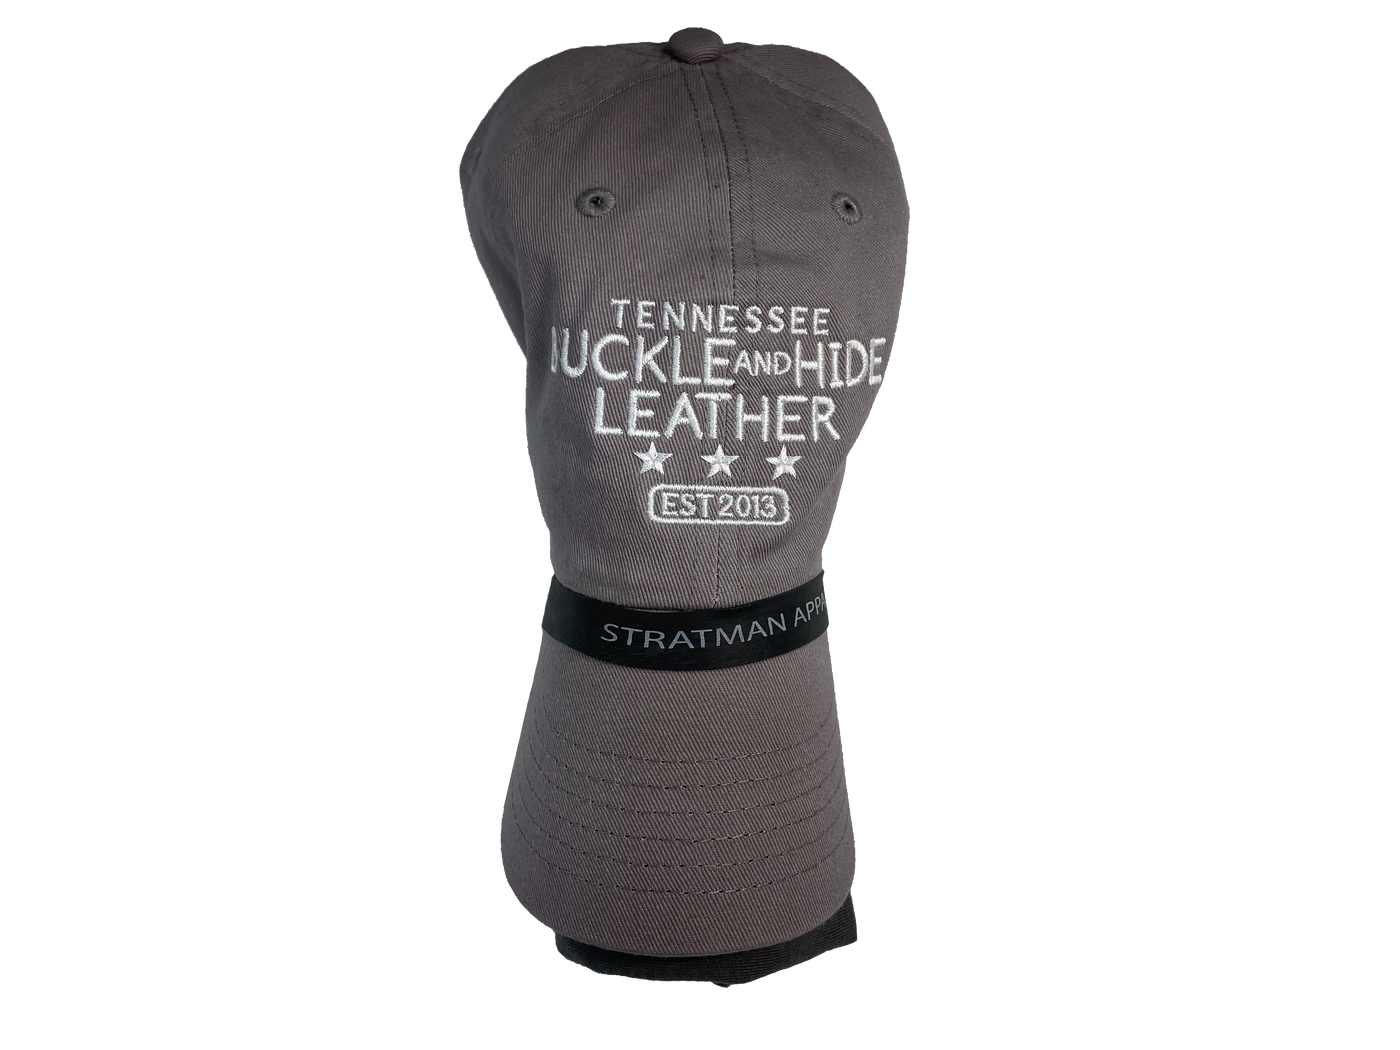 Buckle and Hide Cap/T-shirt Combo Pack